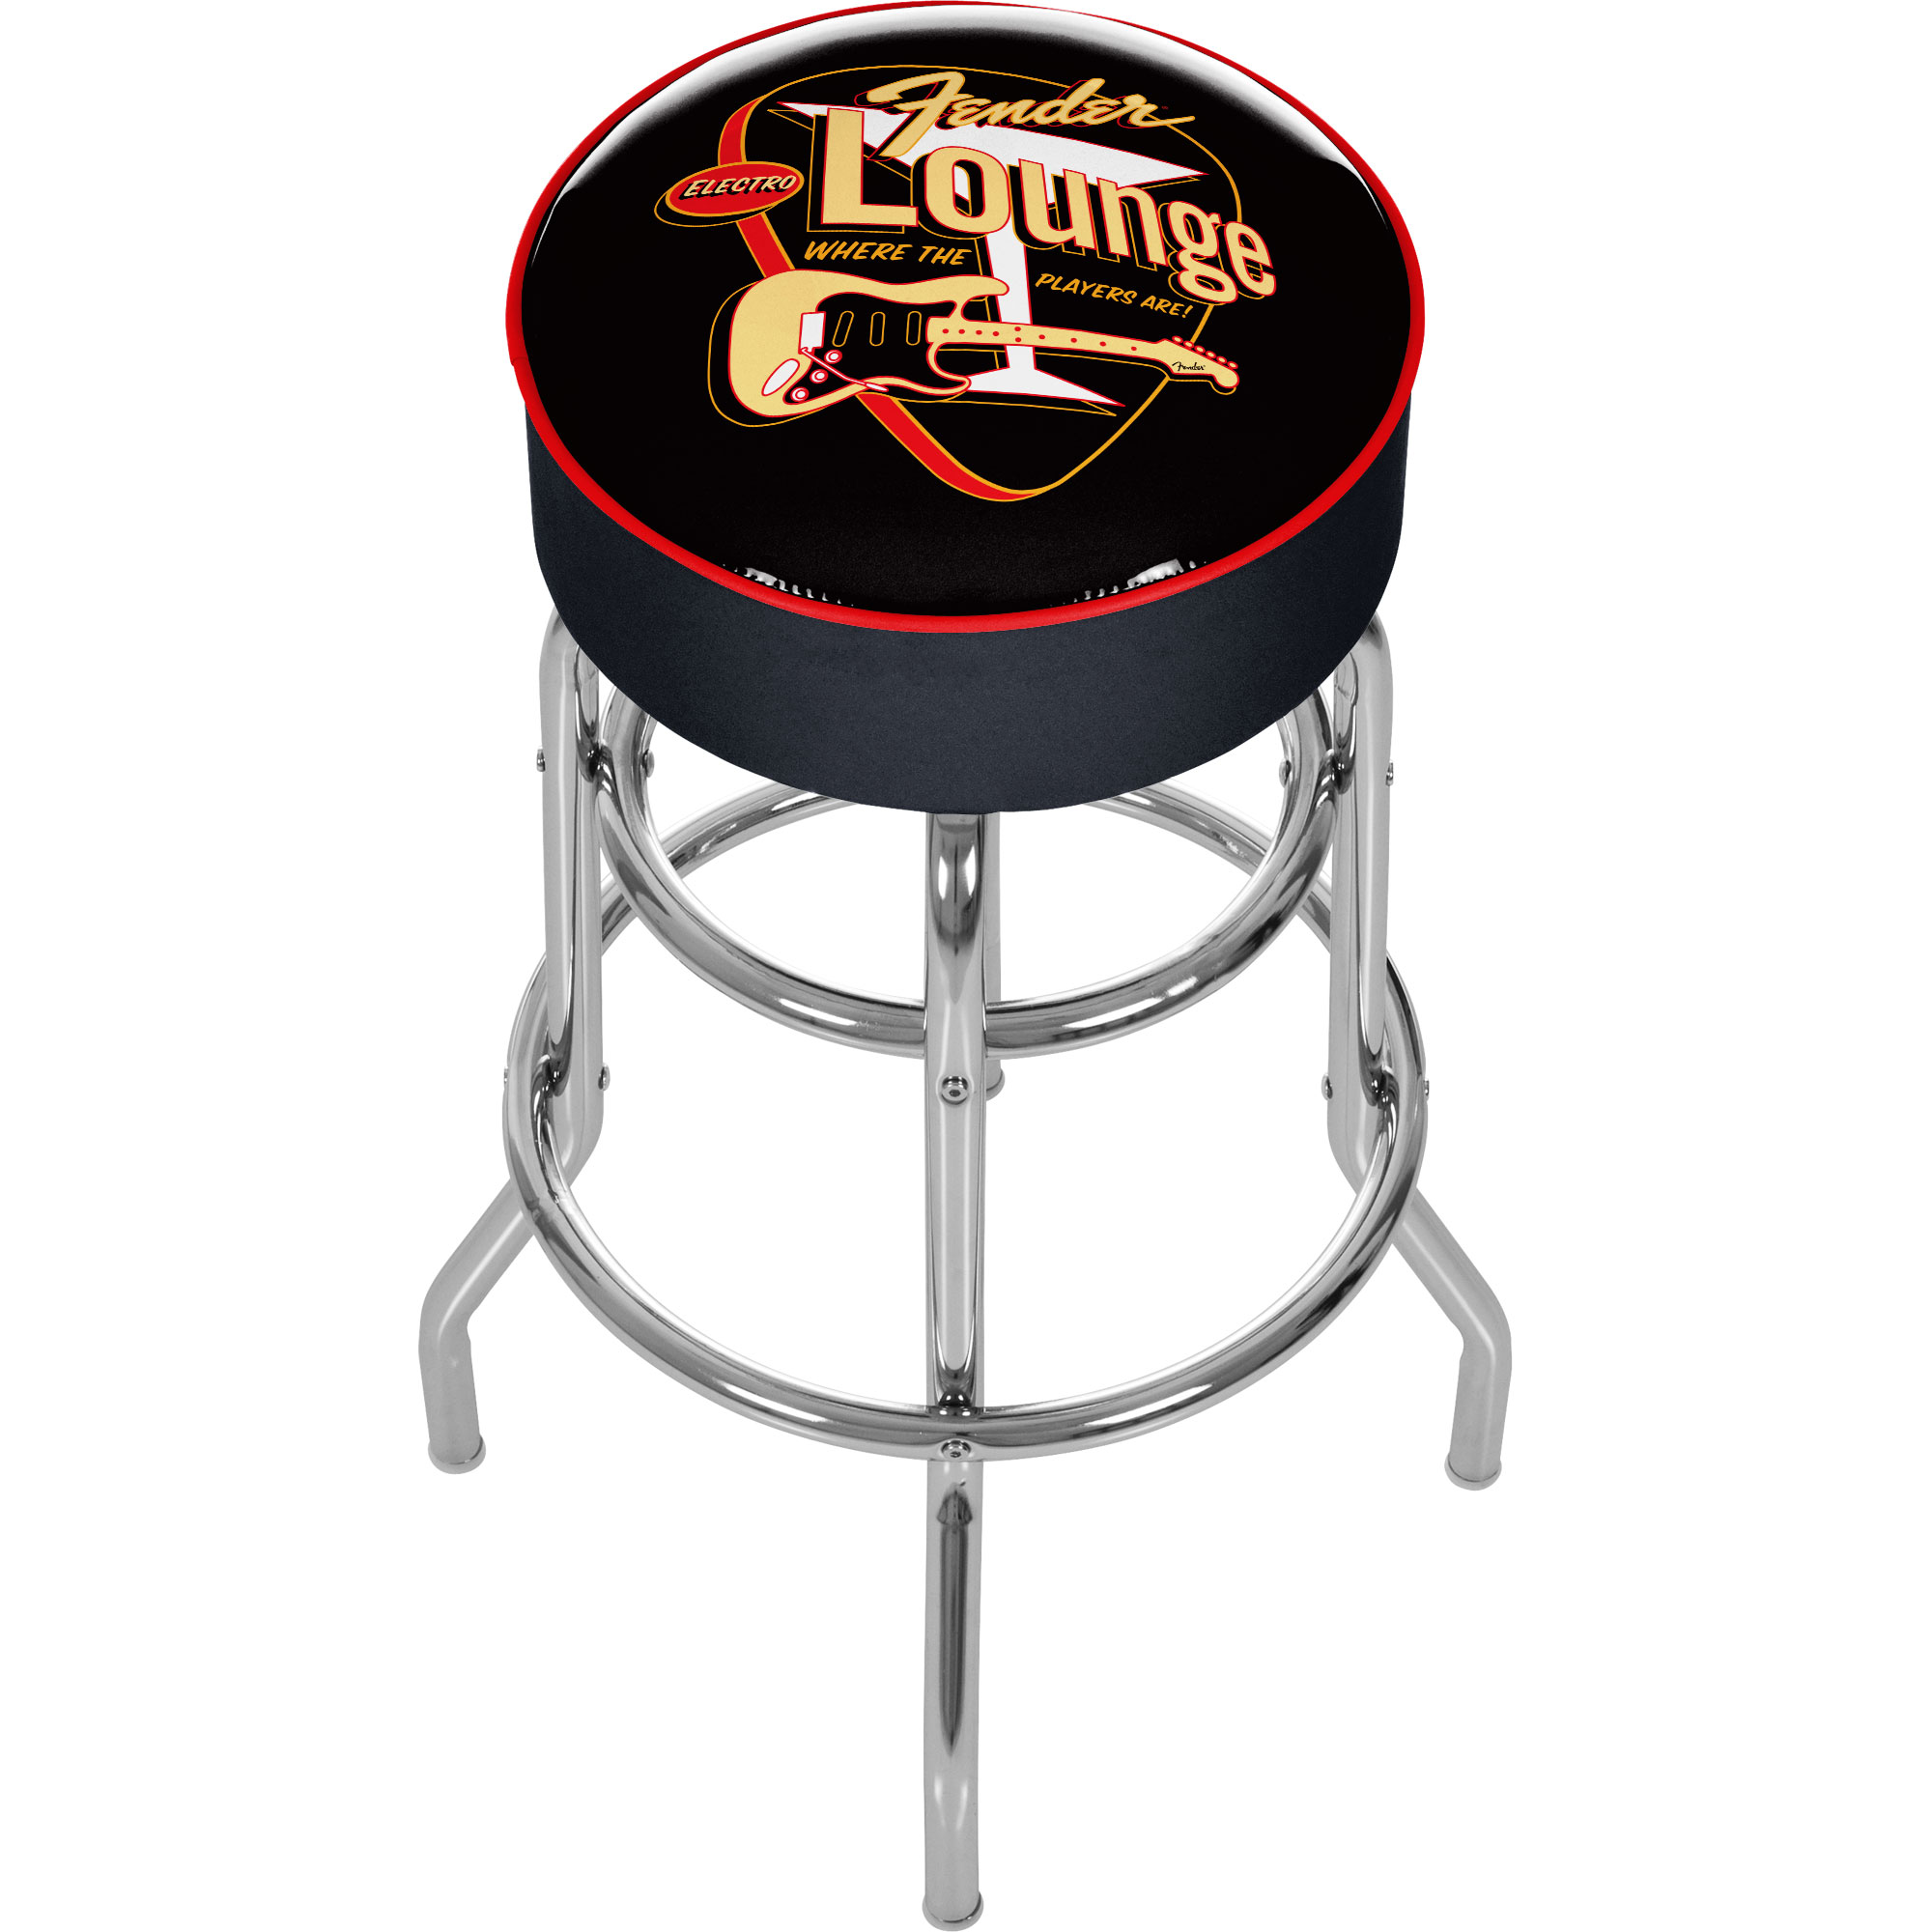 Trademark Fender Electro Lounge Padded Bar Stool - Made In USA